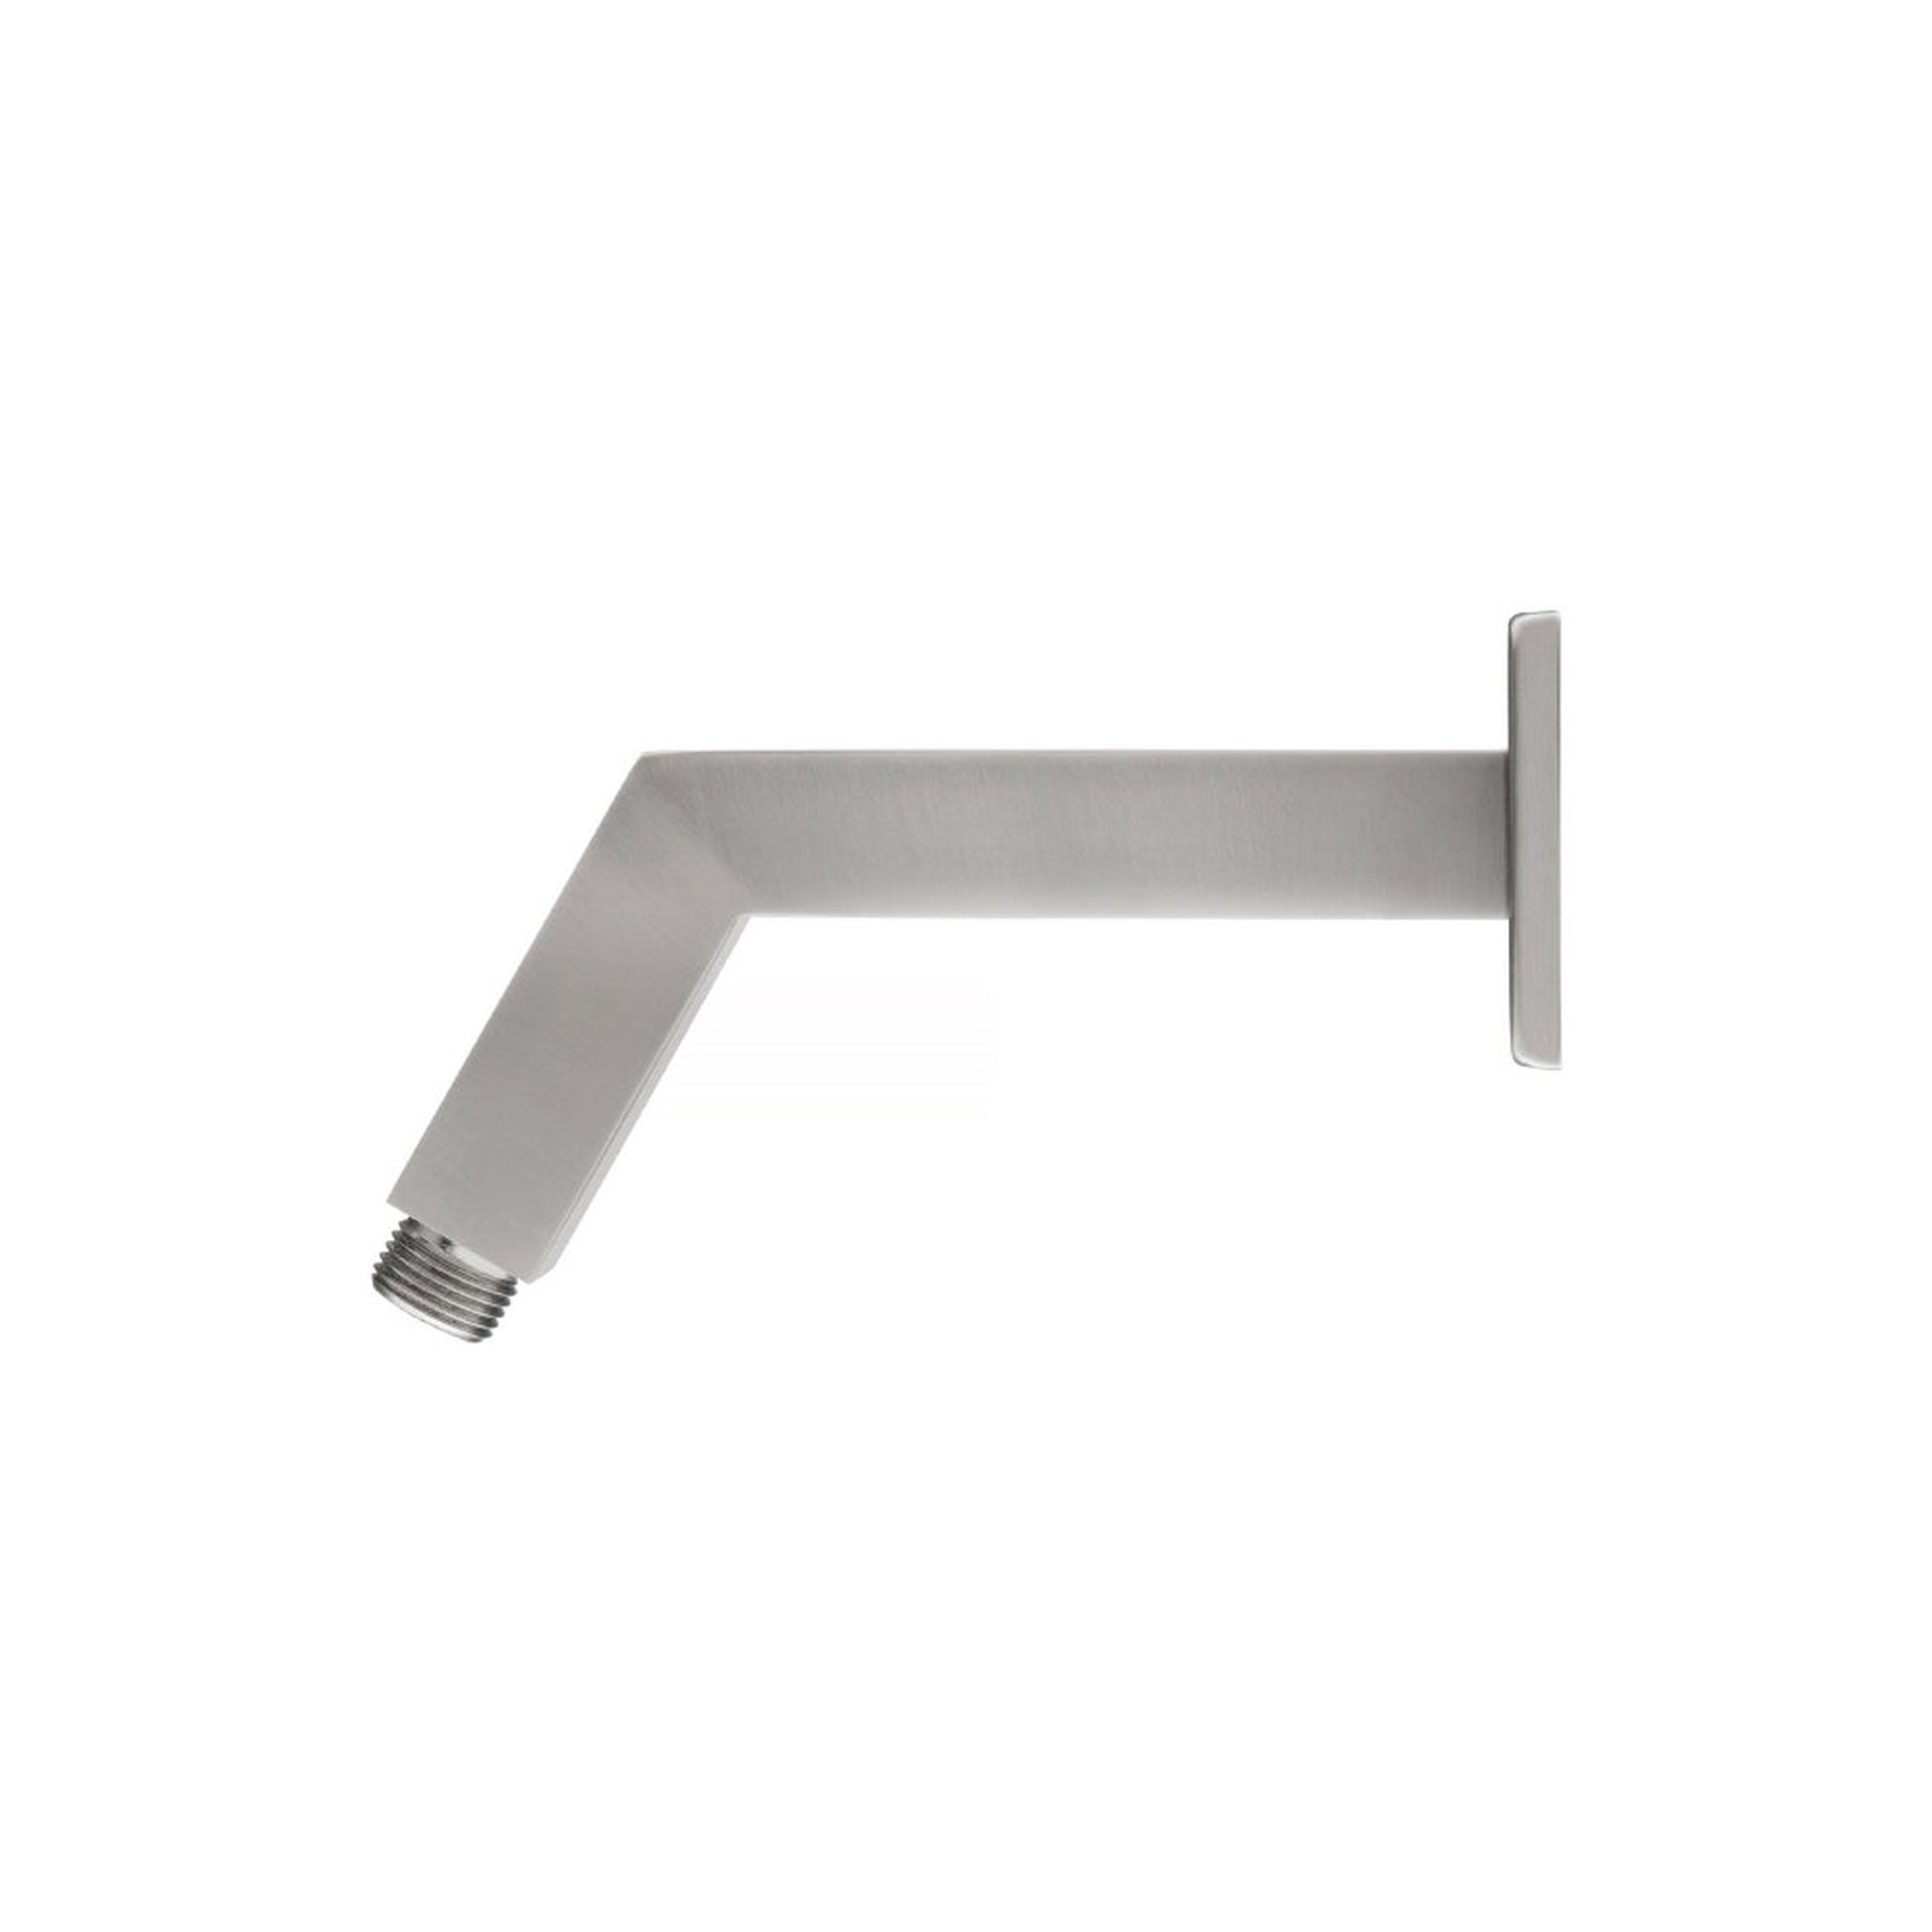 Isenberg Universal Fixtures 7" Brushed Nickel PVD Solid Brass Wall-Mounted Standard Shower Arm With Square Sliding Flange